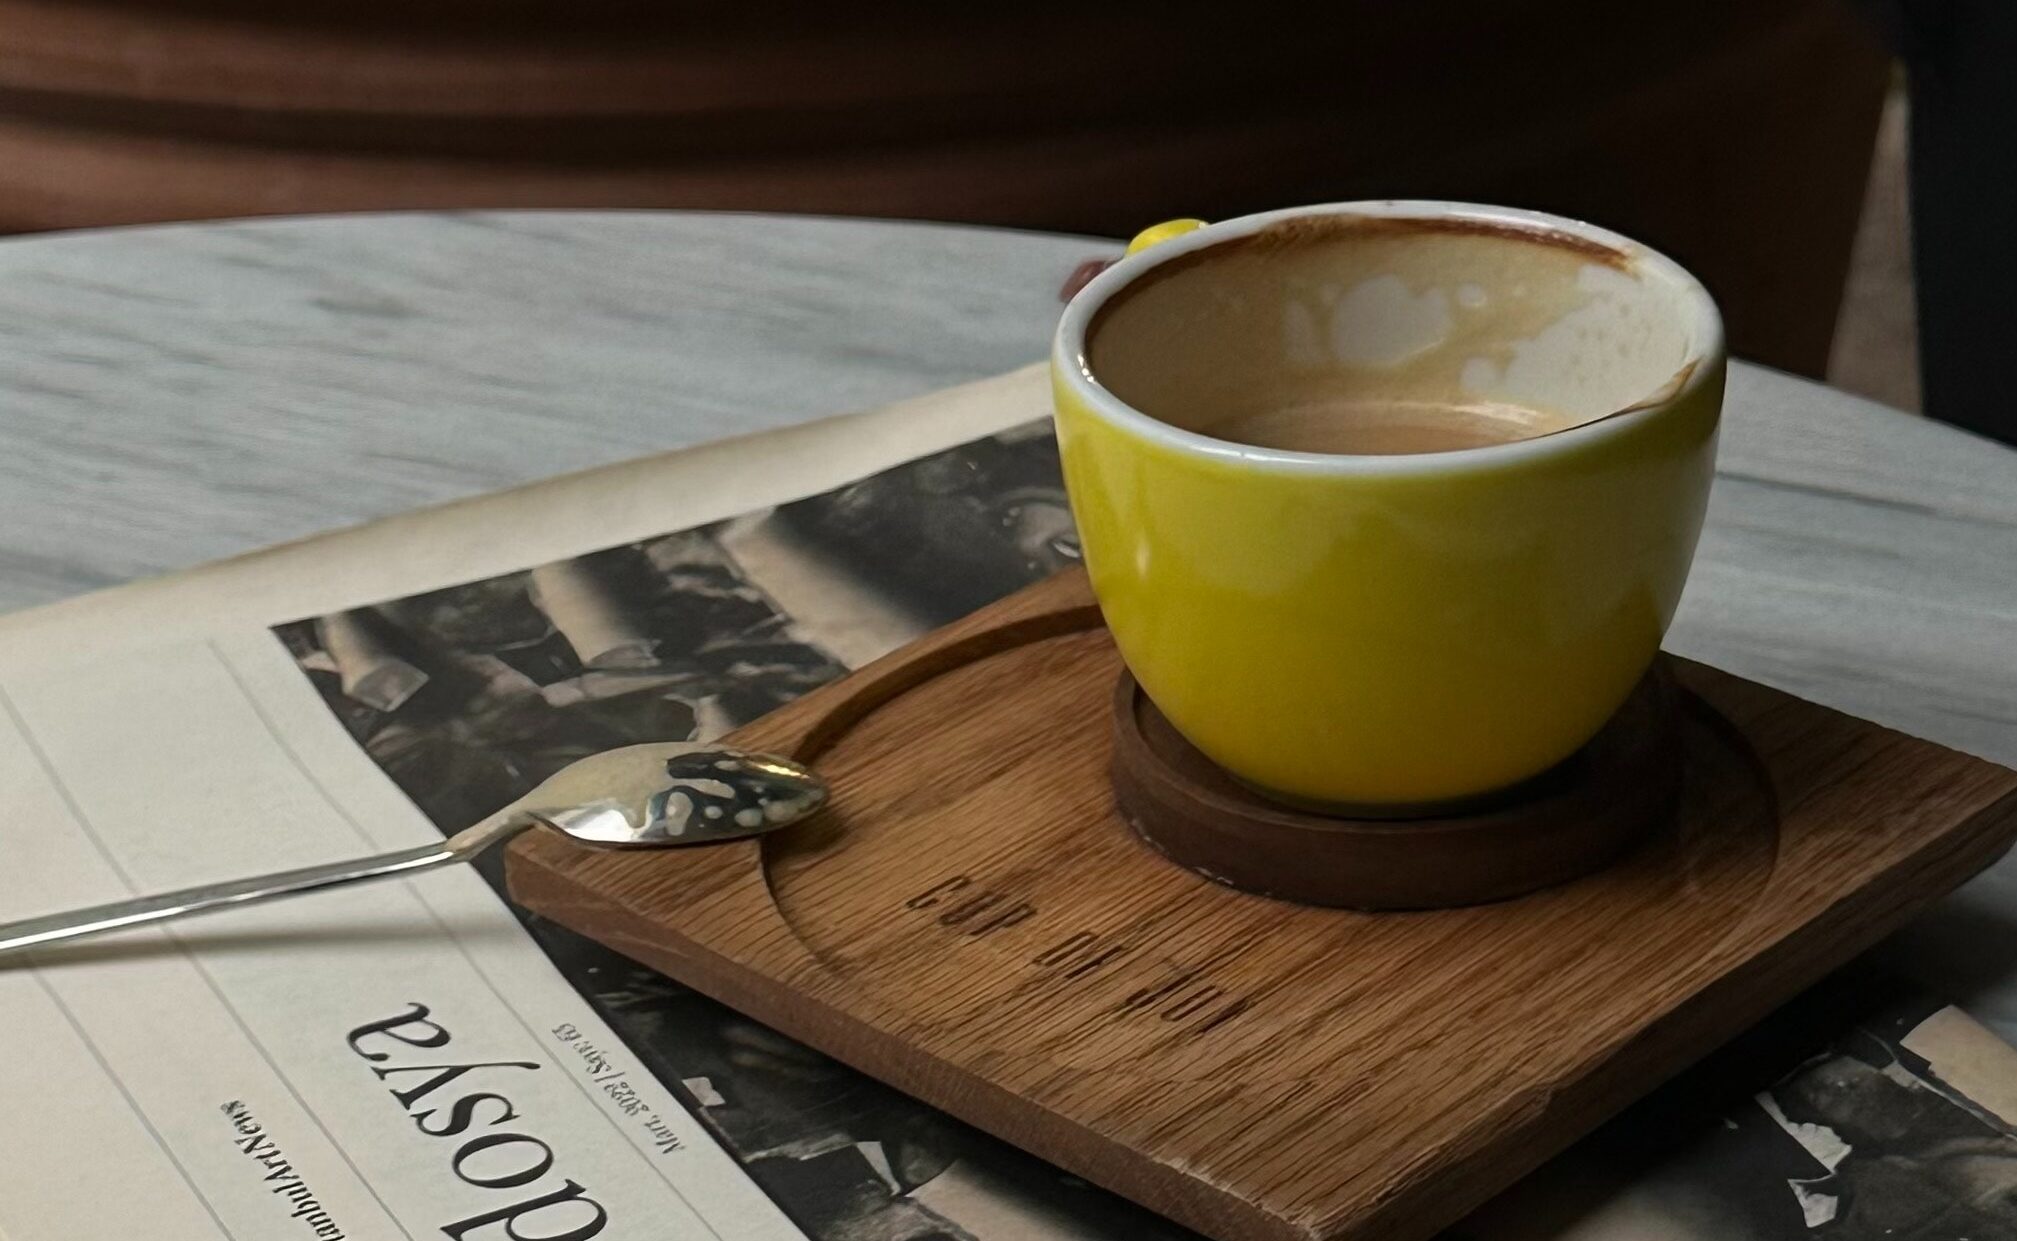 Photograph of half empty coffee cup and used spoon sitting on top of a newspaper.